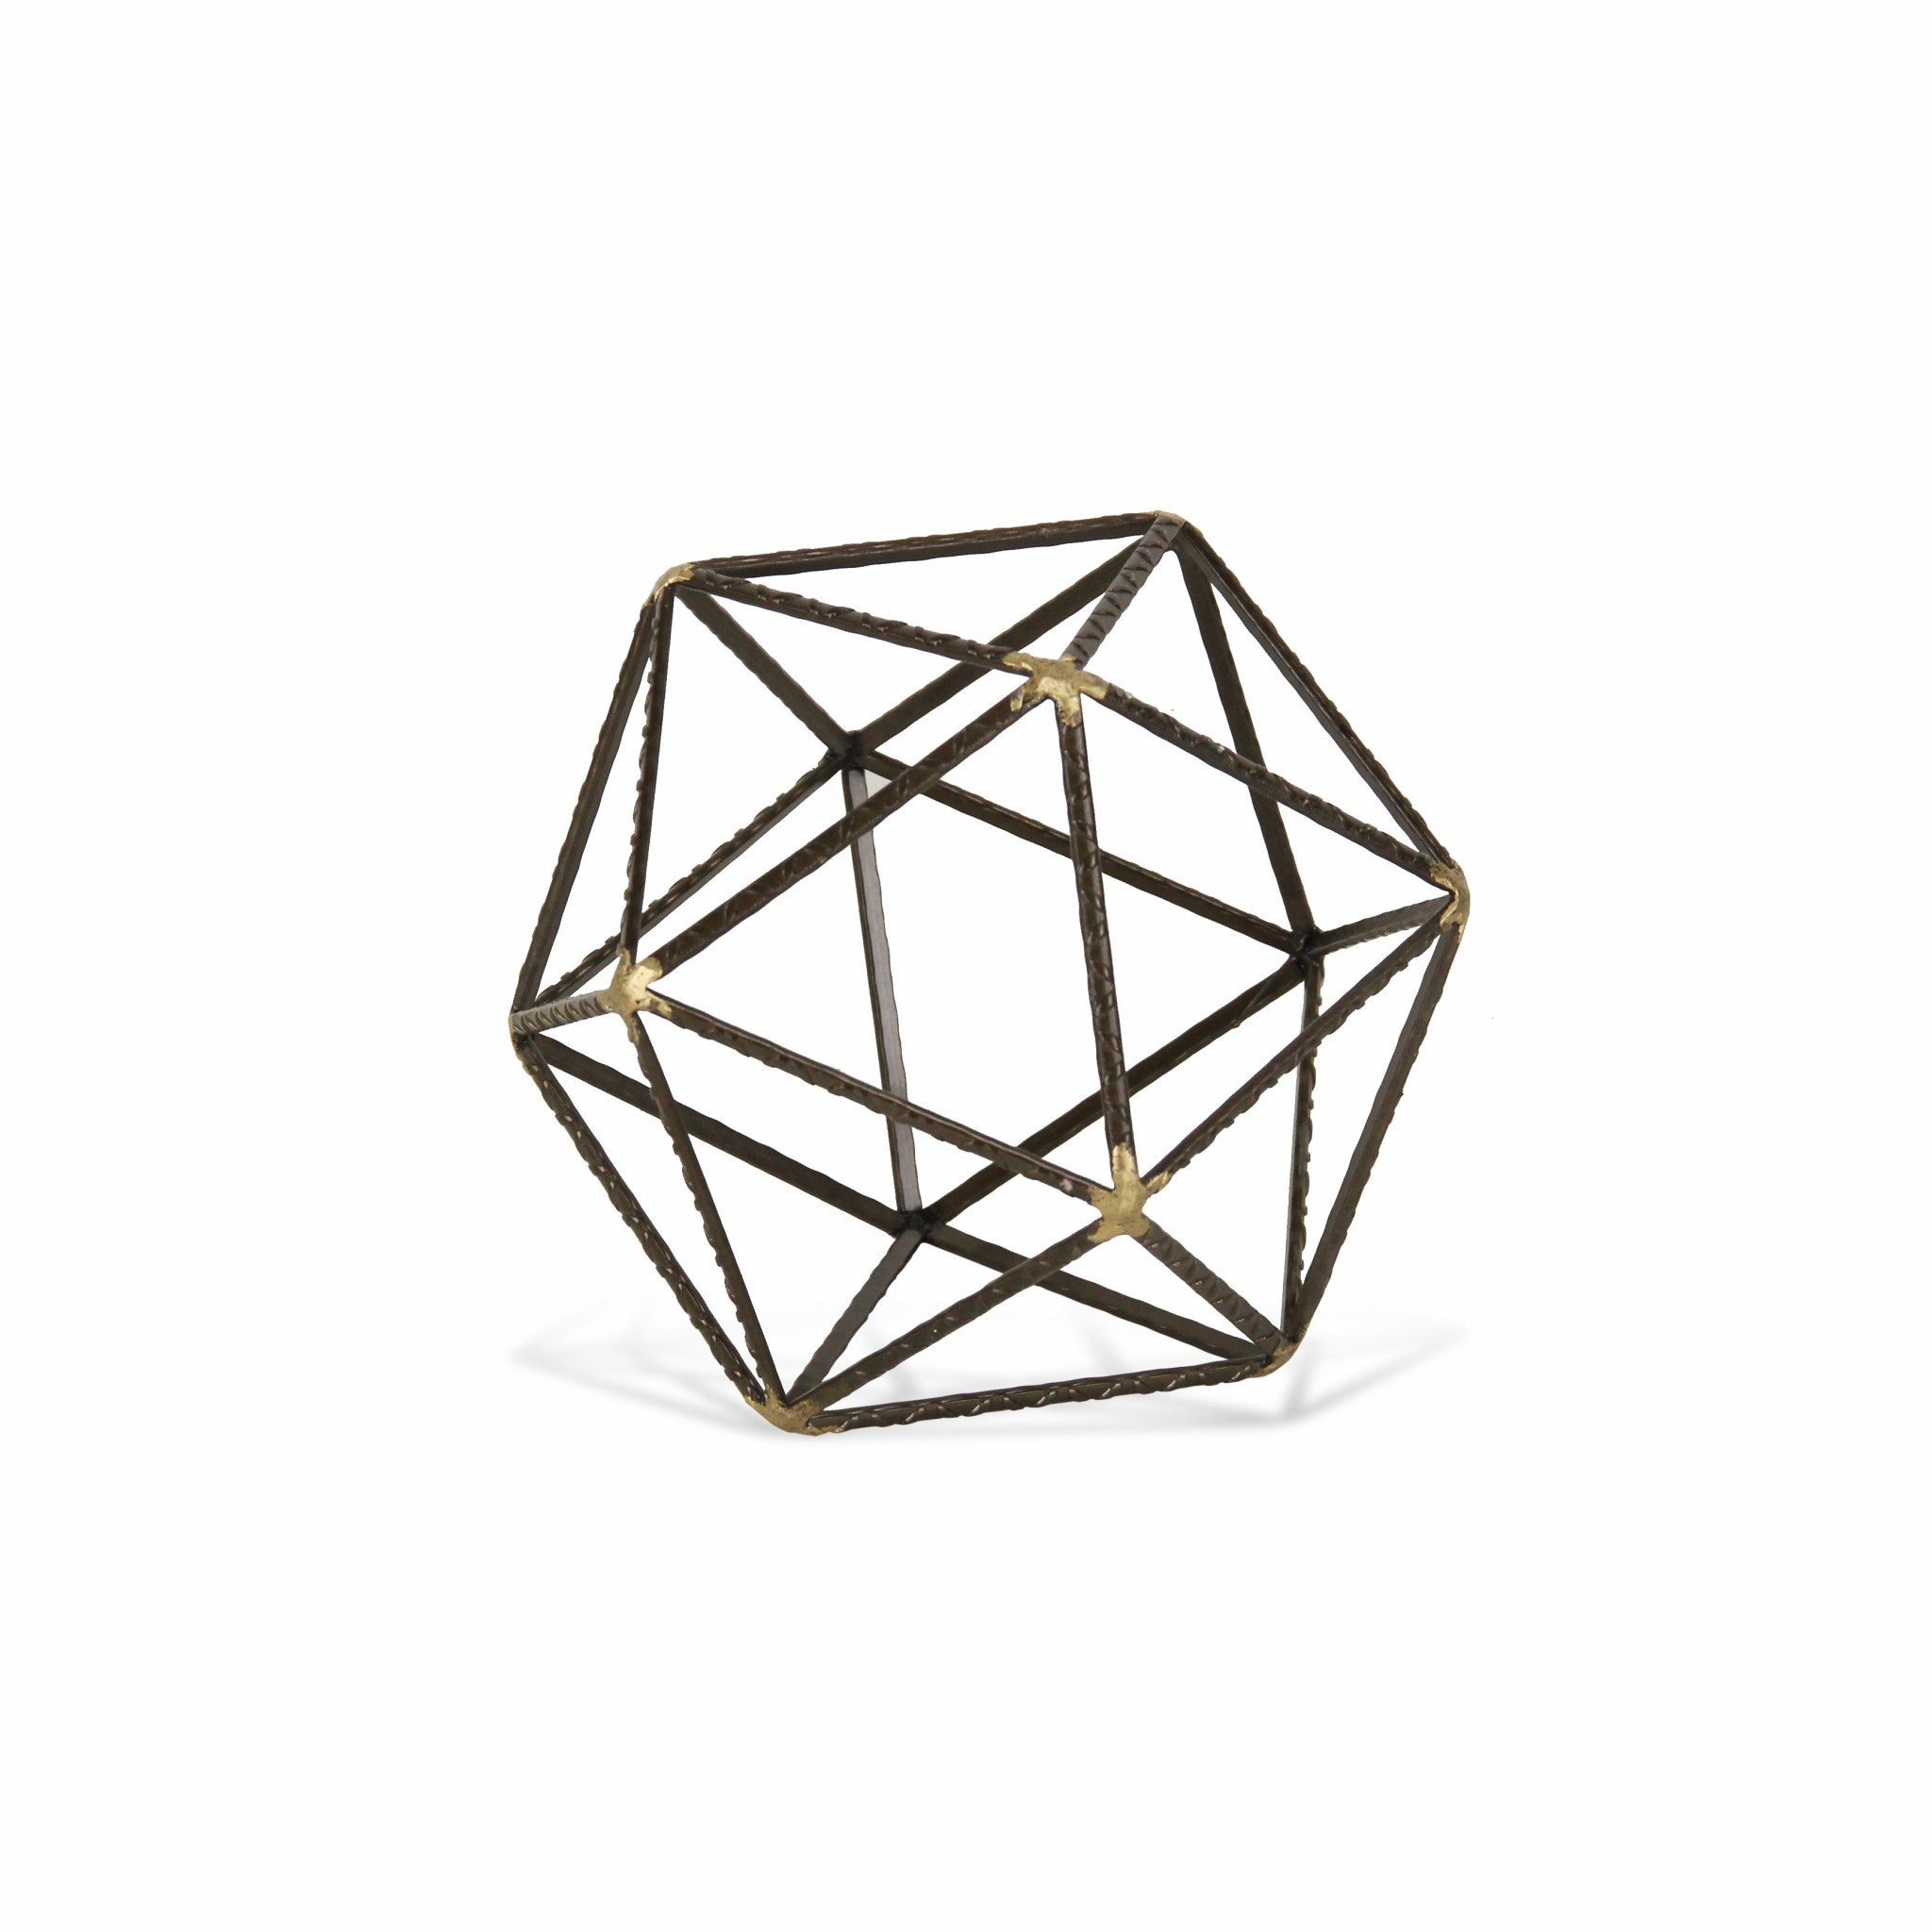 6" Brown and Gold Metal Hand Painted Geometric Orb Tabletop Sculpture